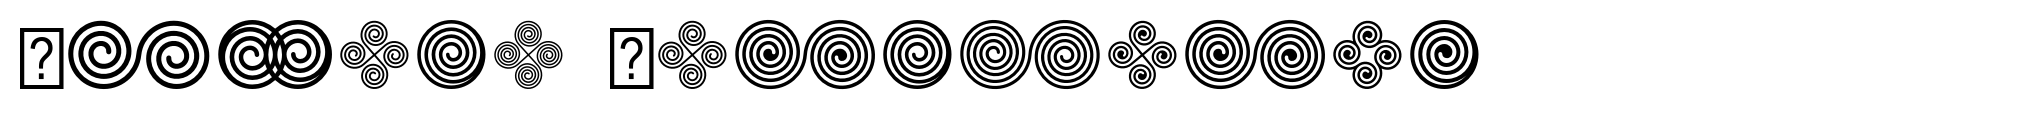 Spiral Ornaments image